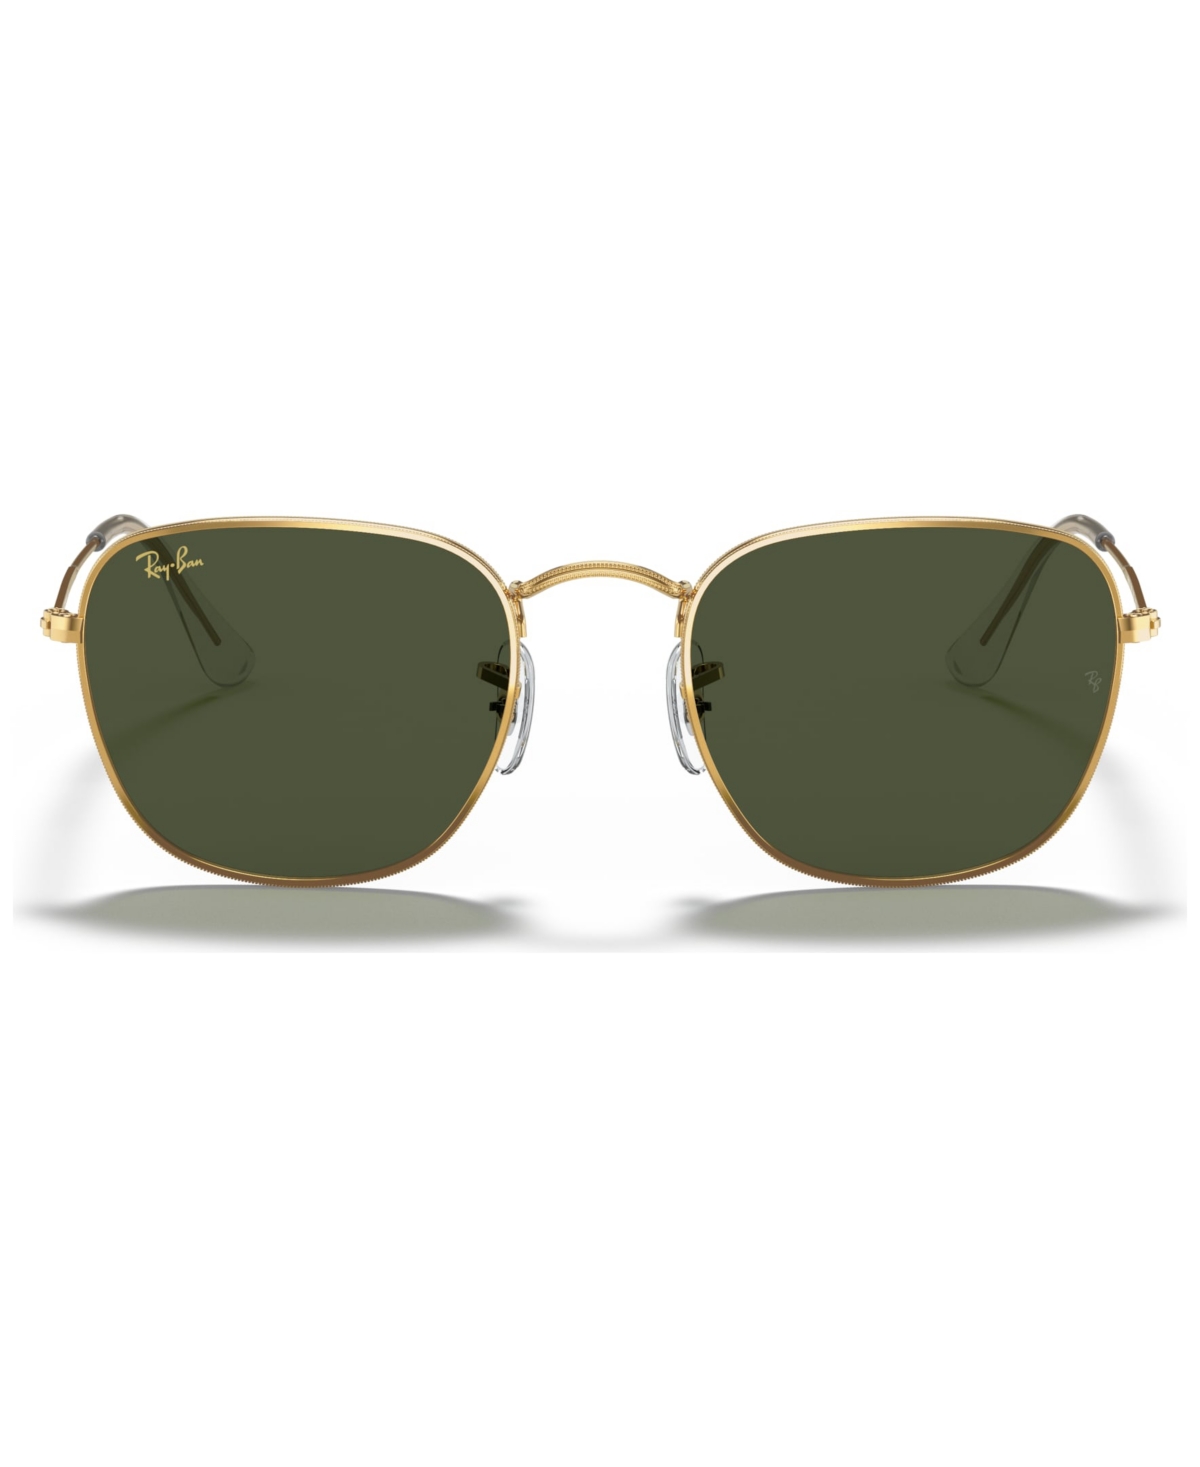 Ray Ban Unisex Sunglasses, Frank Rb3857 51 In Legend Gold,green